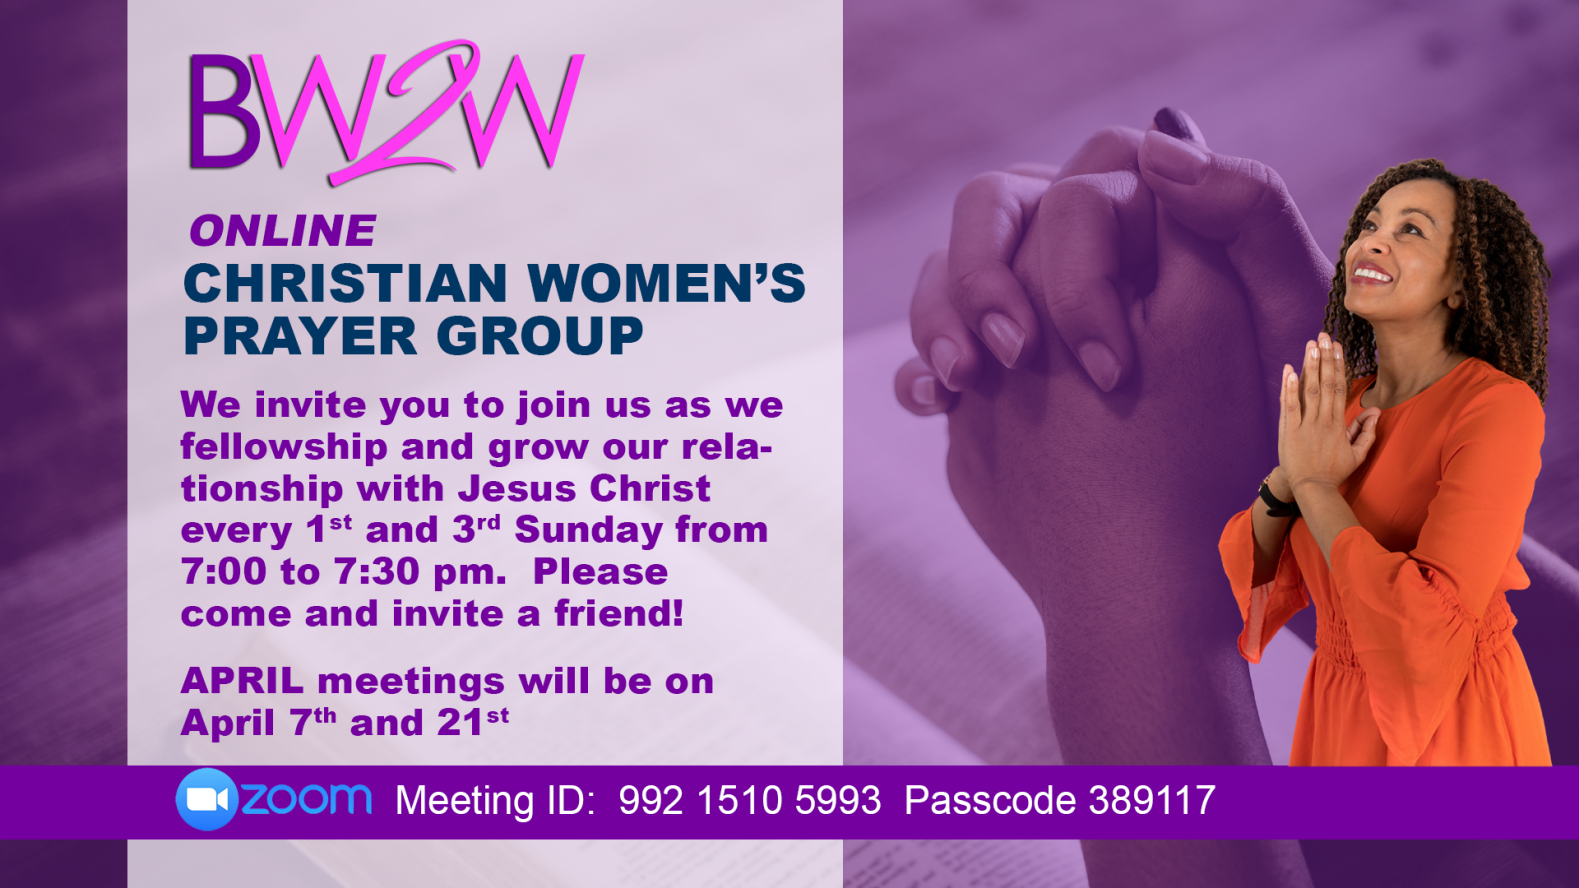 BW2W Online Christian Women's Prayer Group | Sunday April 7th and 21st